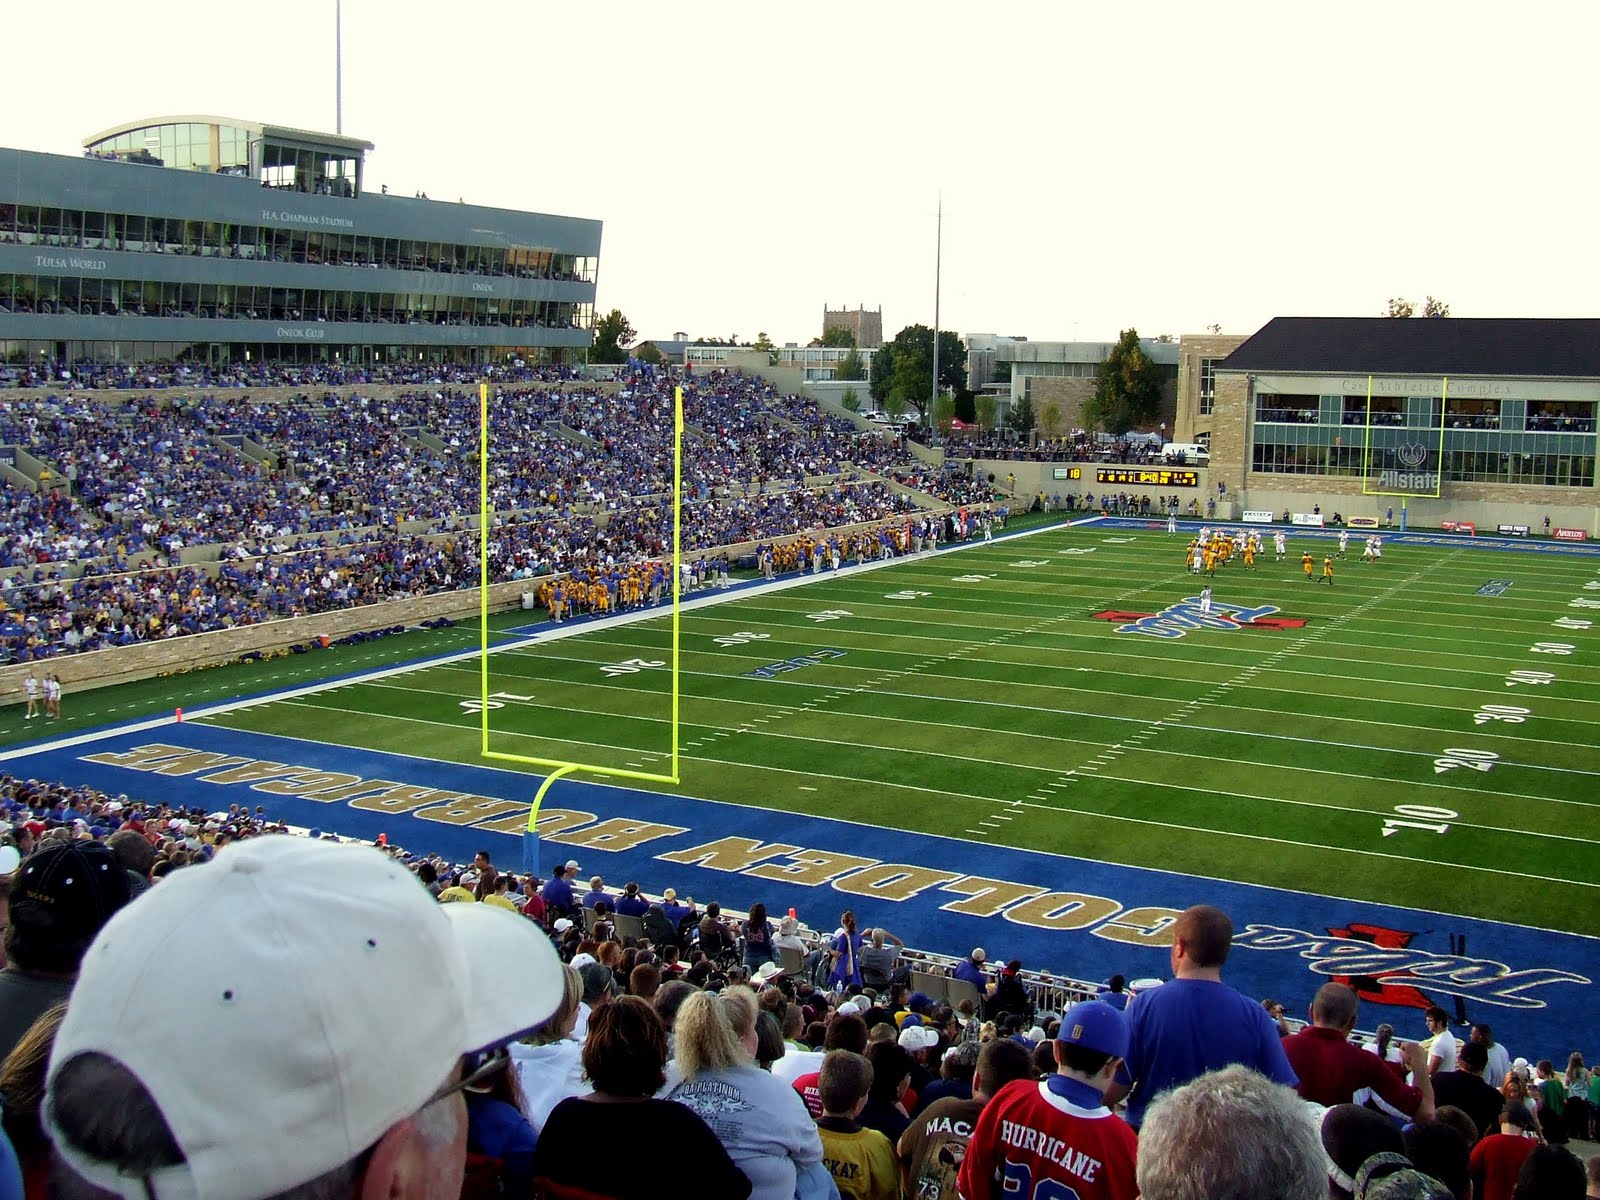 H.A. Chapman Stadium - Tulsa | Tickets, Schedule, Seating Chart, Directions